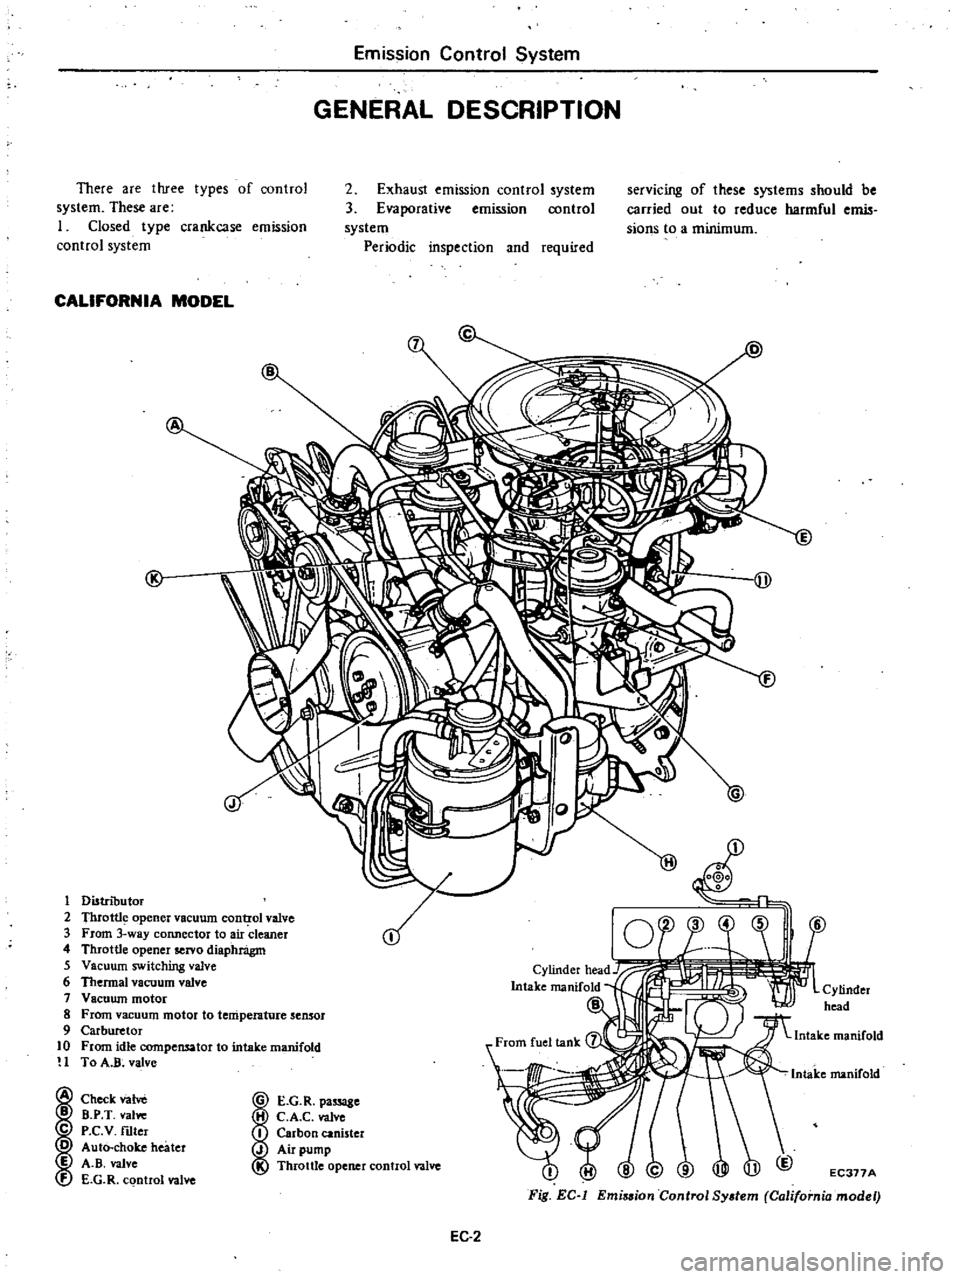 DATSUN 210 1979  Service Manual 
Emission 
Control

System

GENERAL

DESCRIPTION

There 
are 
three

types 
of

control

system 
These 
are

I 
Closed

type 
crankcase 
emission

control

system 
2

Exhaust 
emISSIon 
control

syste